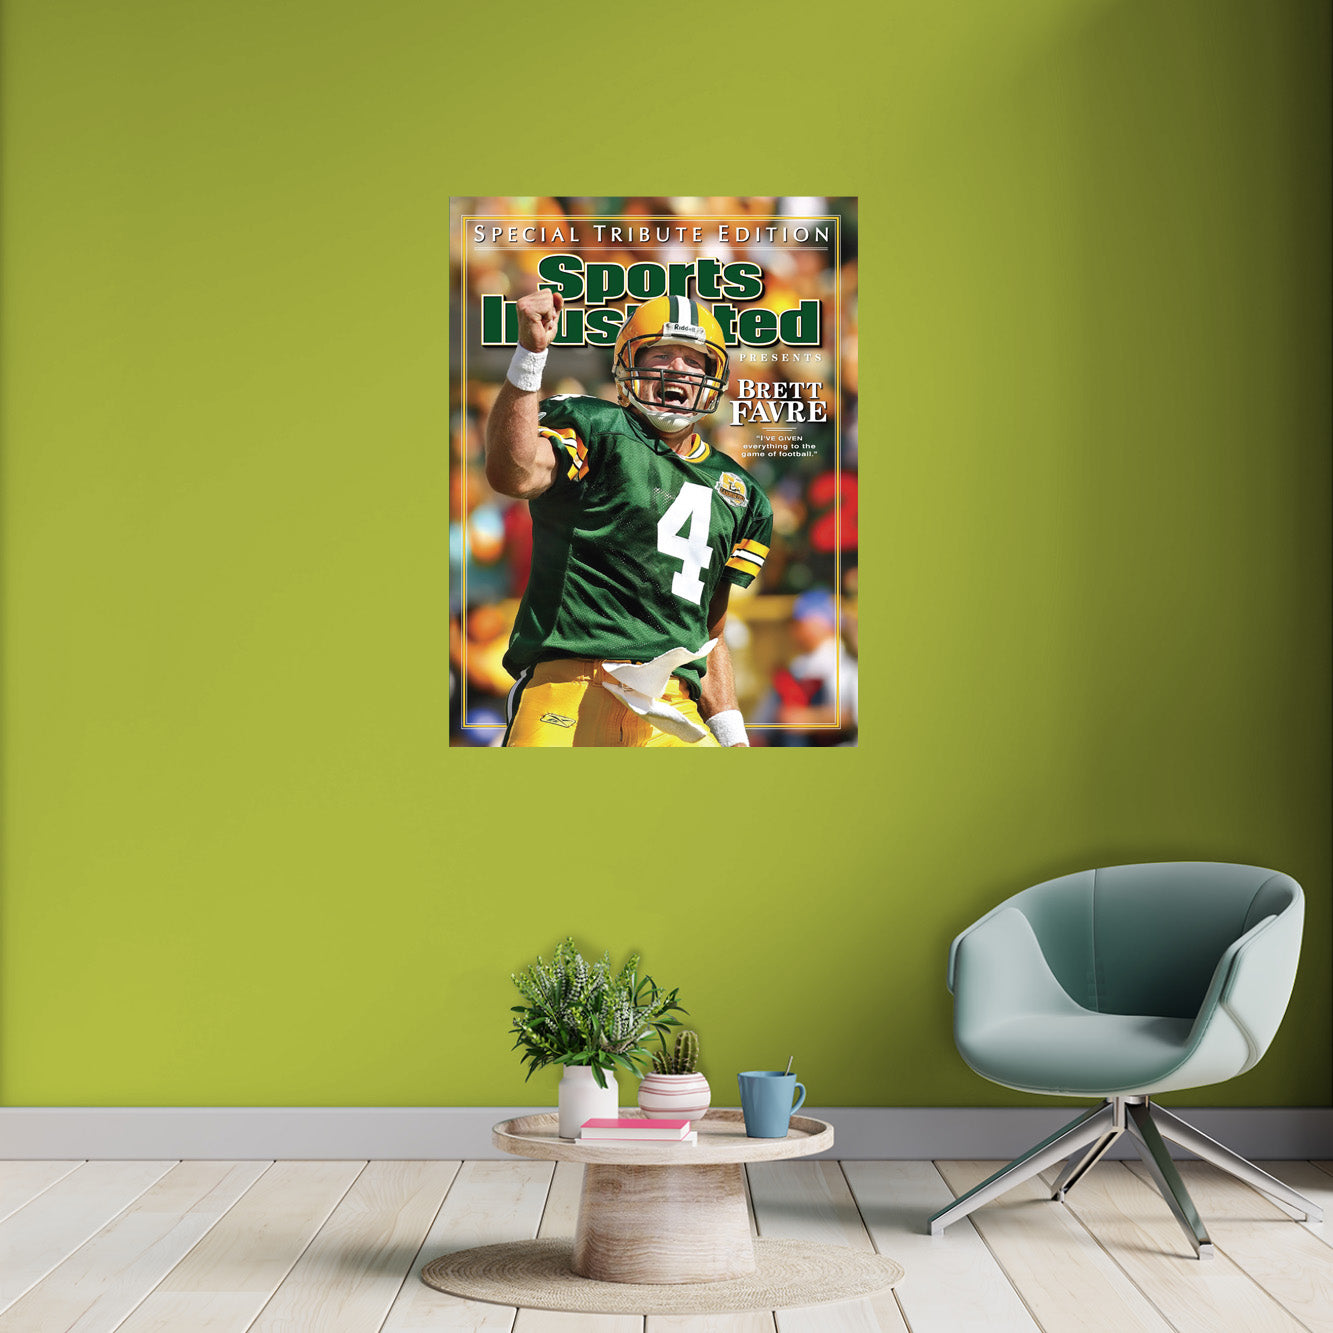 Green Bay Packers: Brett Favre Special Tribute Edition Sports Illustrated Cover - Officially Licensed NFL Removable Adhesive Decal